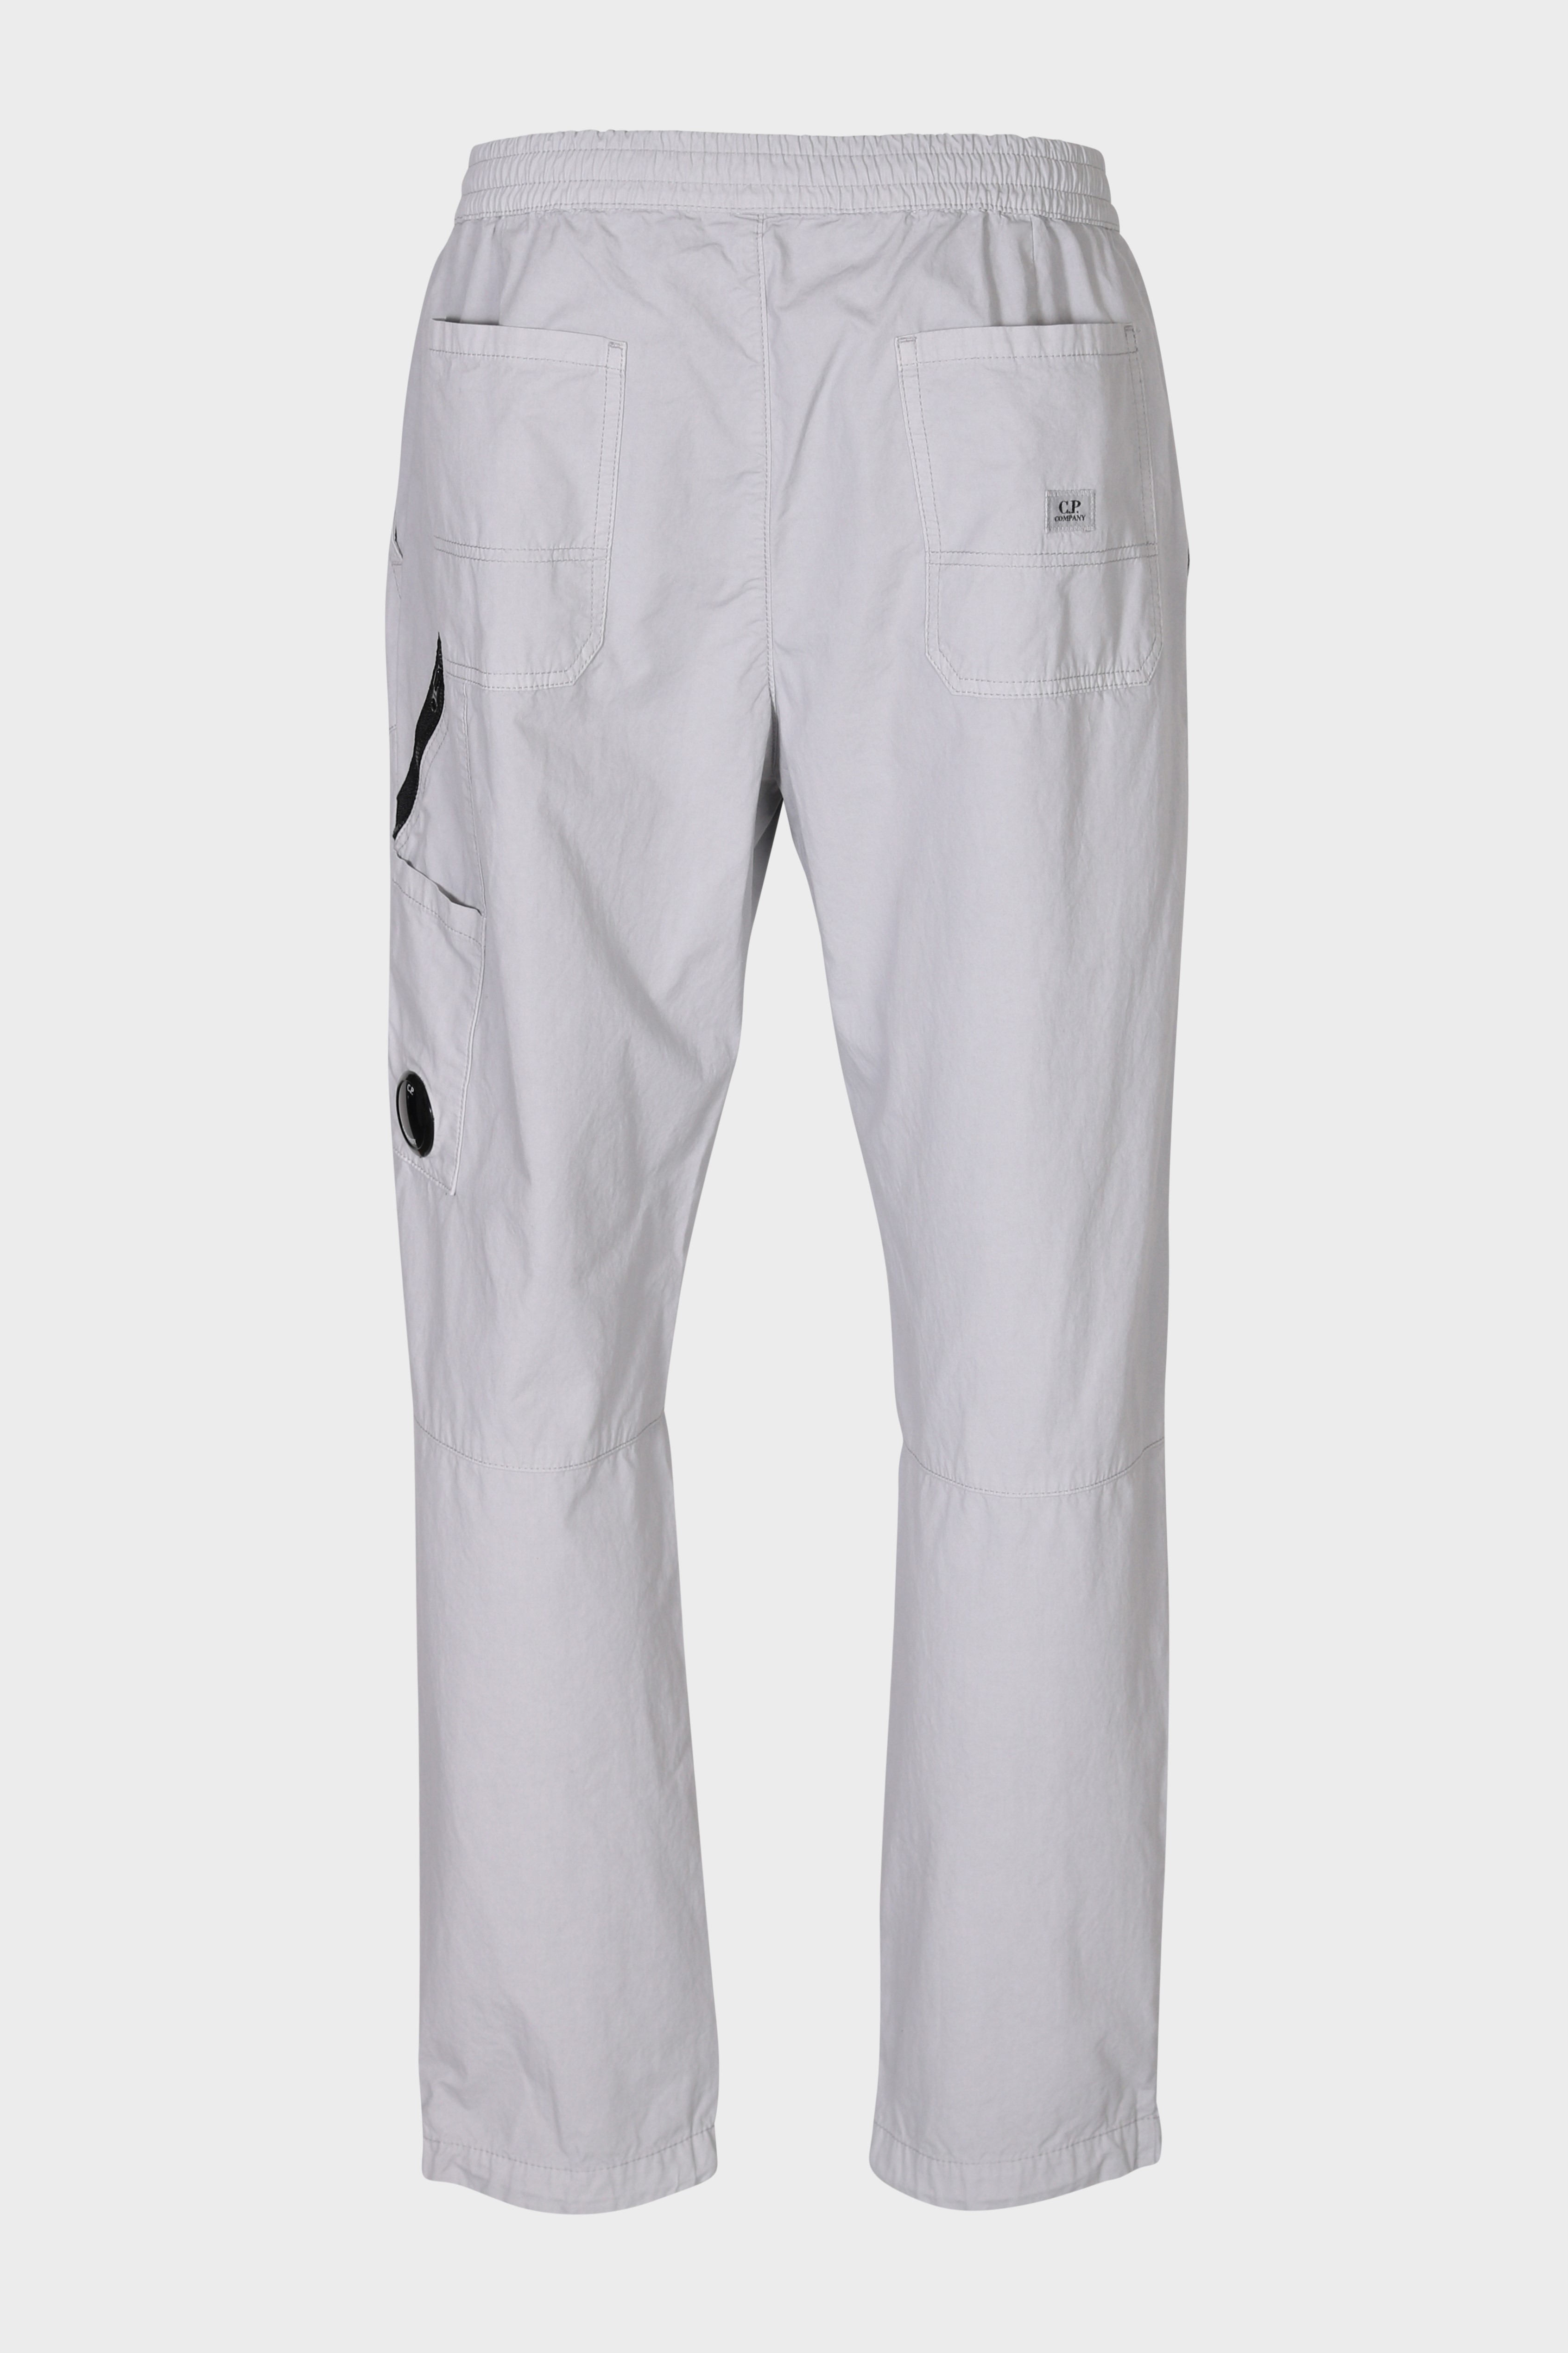 C.P. COMPANY Worker Pant in Drizzle Grey